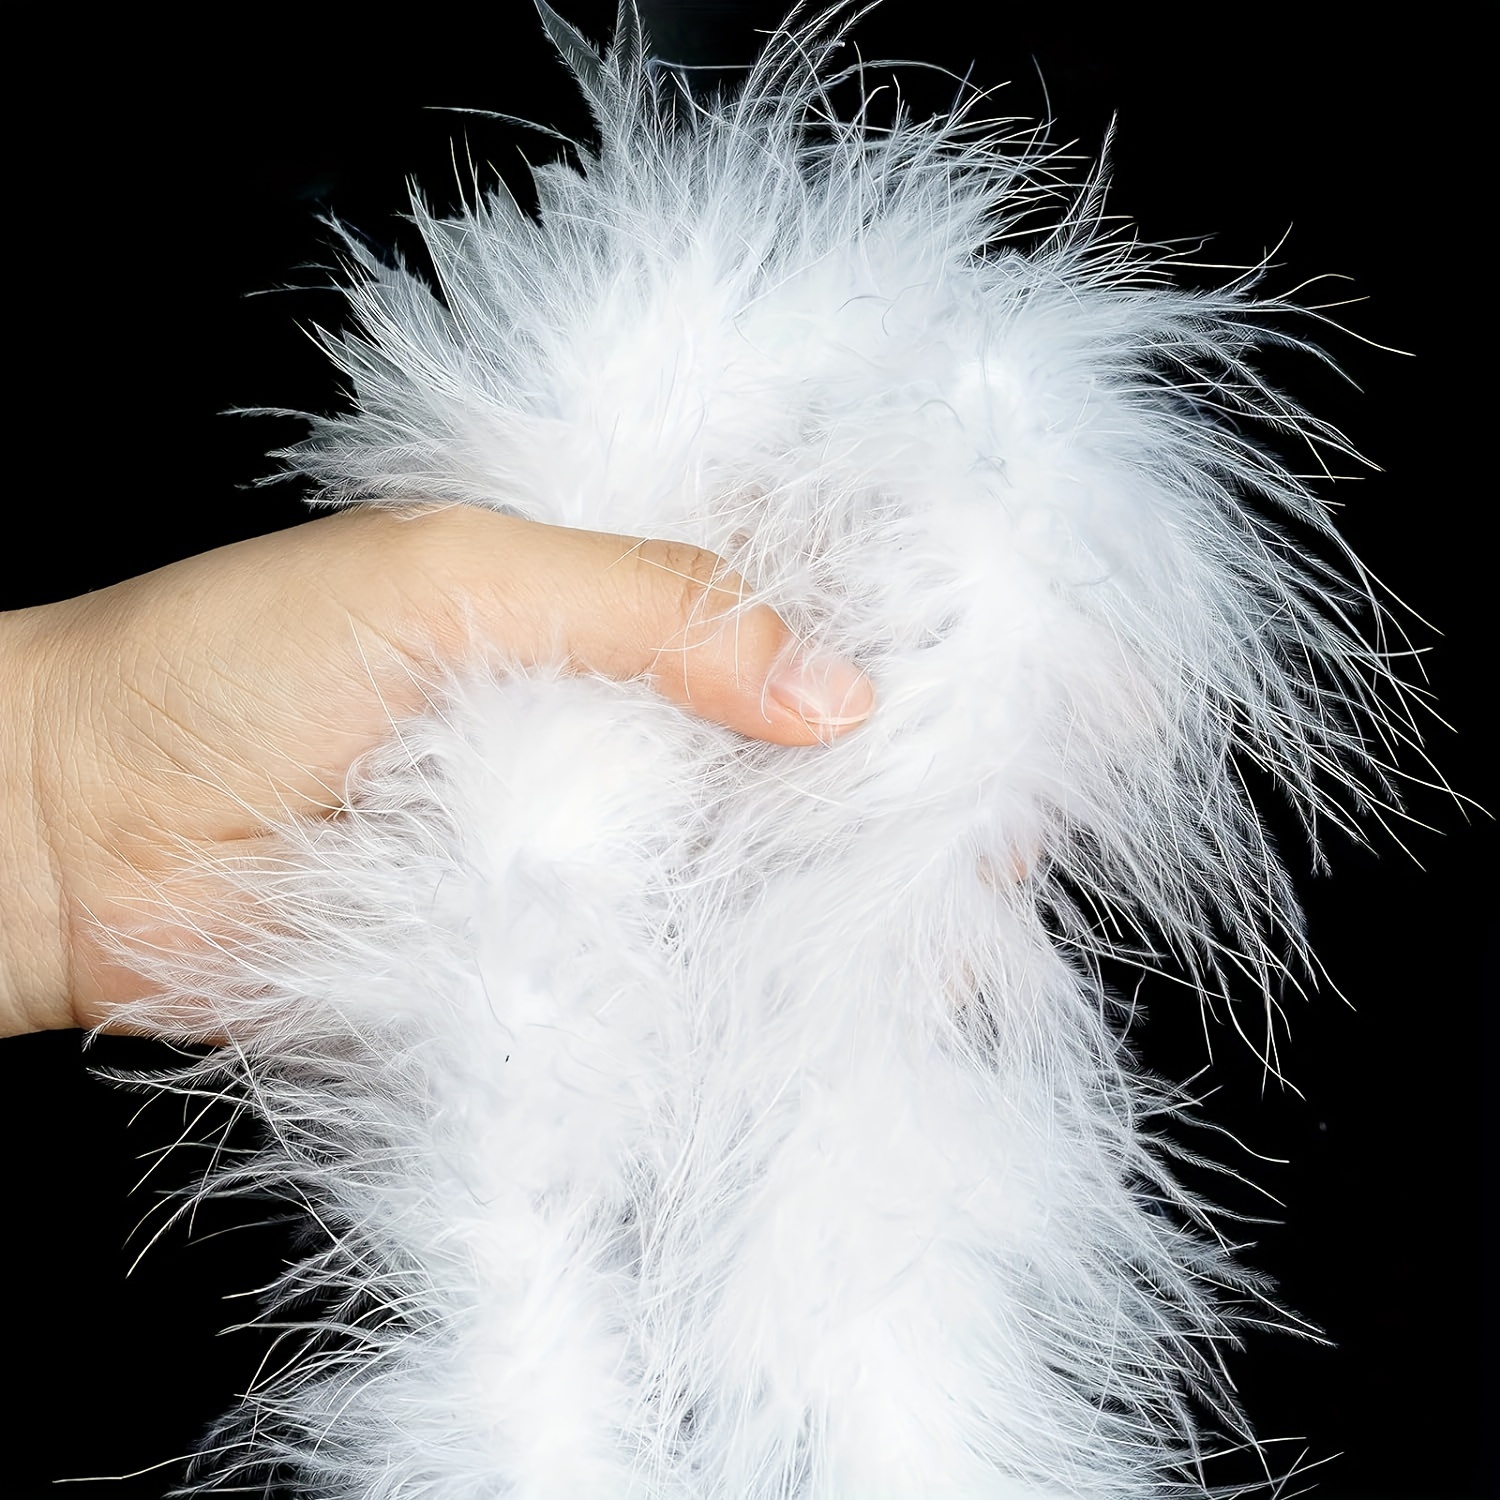 Ultimate Party Halloween Feather Boas - 6 Pack of 6 Feet Long Boas with Feathers - Perfect for Halloween Costumes, Party Outfits, and Party Favors